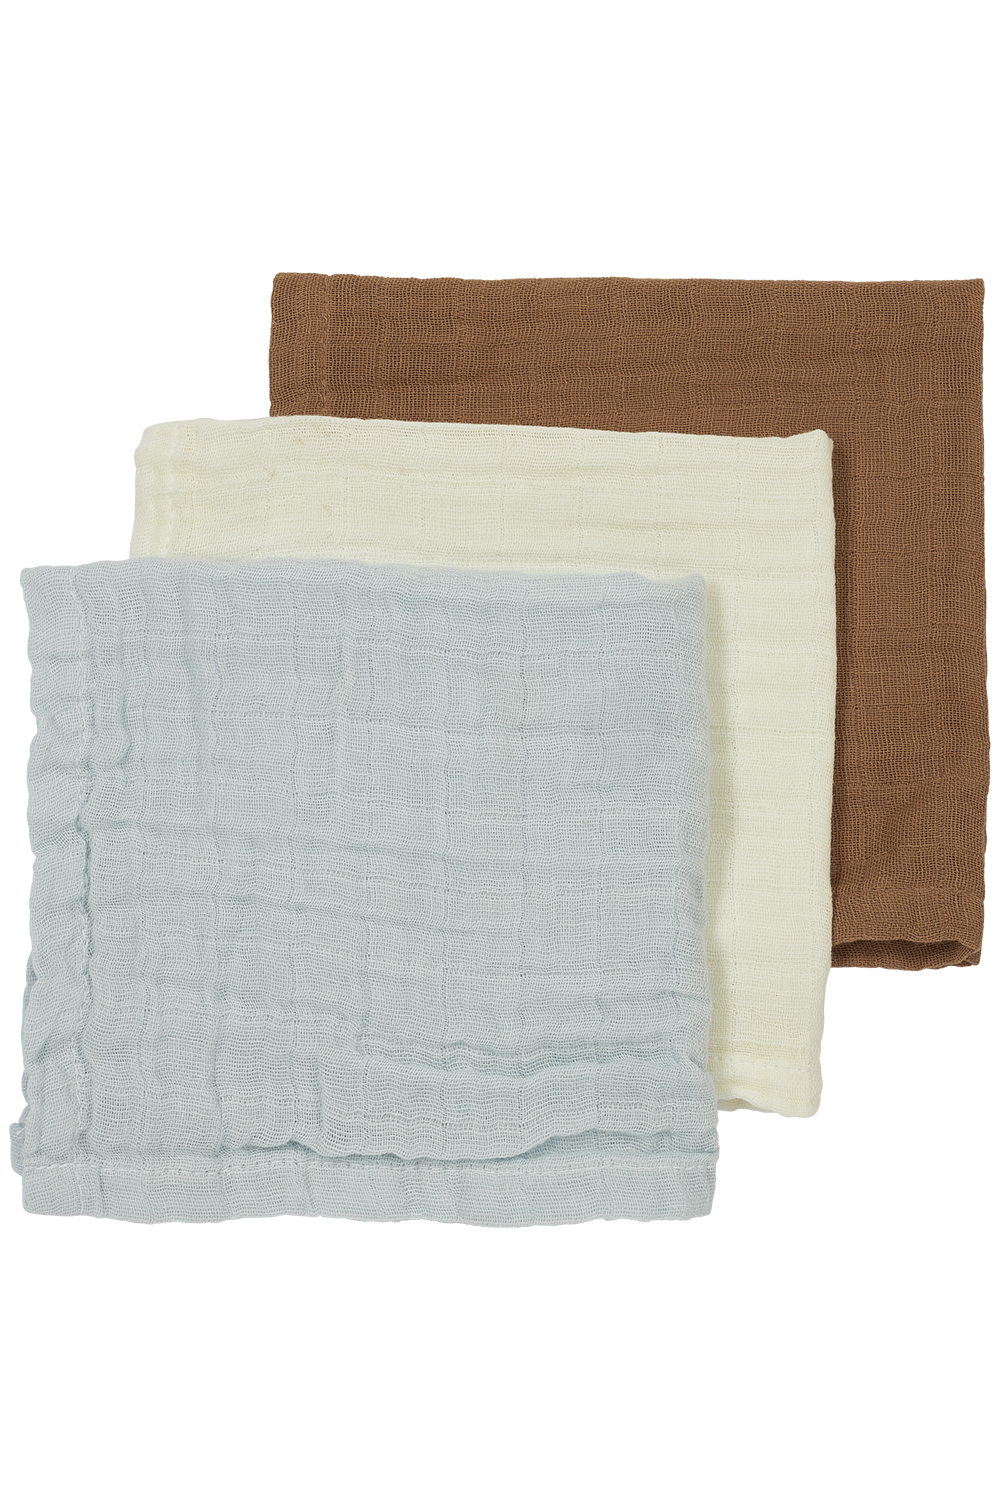 Facecloth 3-pack muslin Uni - offwhite/light blue/toffee - 30x30cm